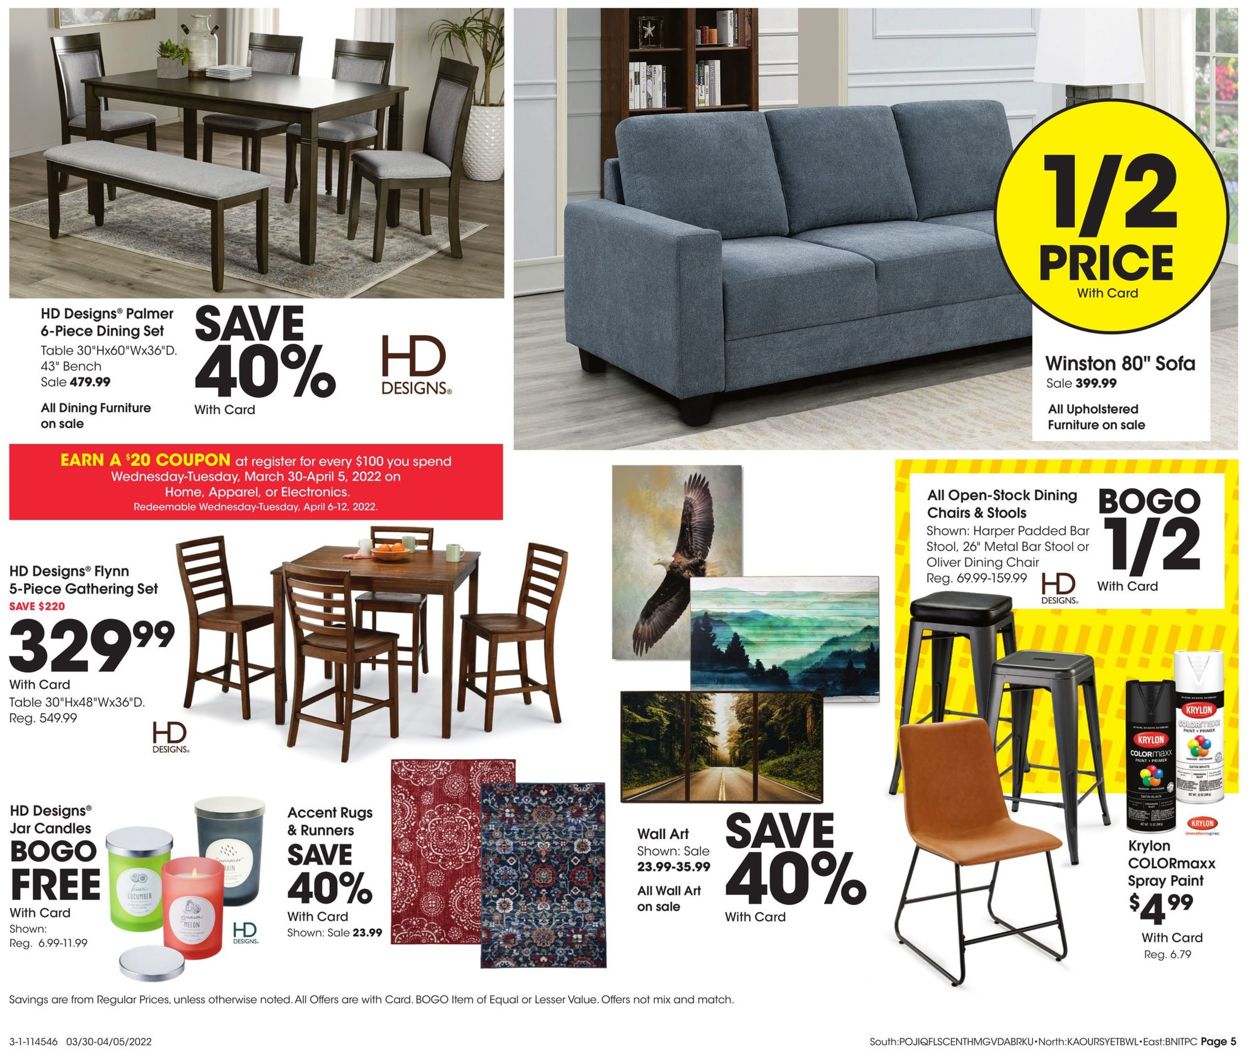 Fred Meyer Weekly Ad Circular - valid 03/30-04/05/2022 (Page 5)